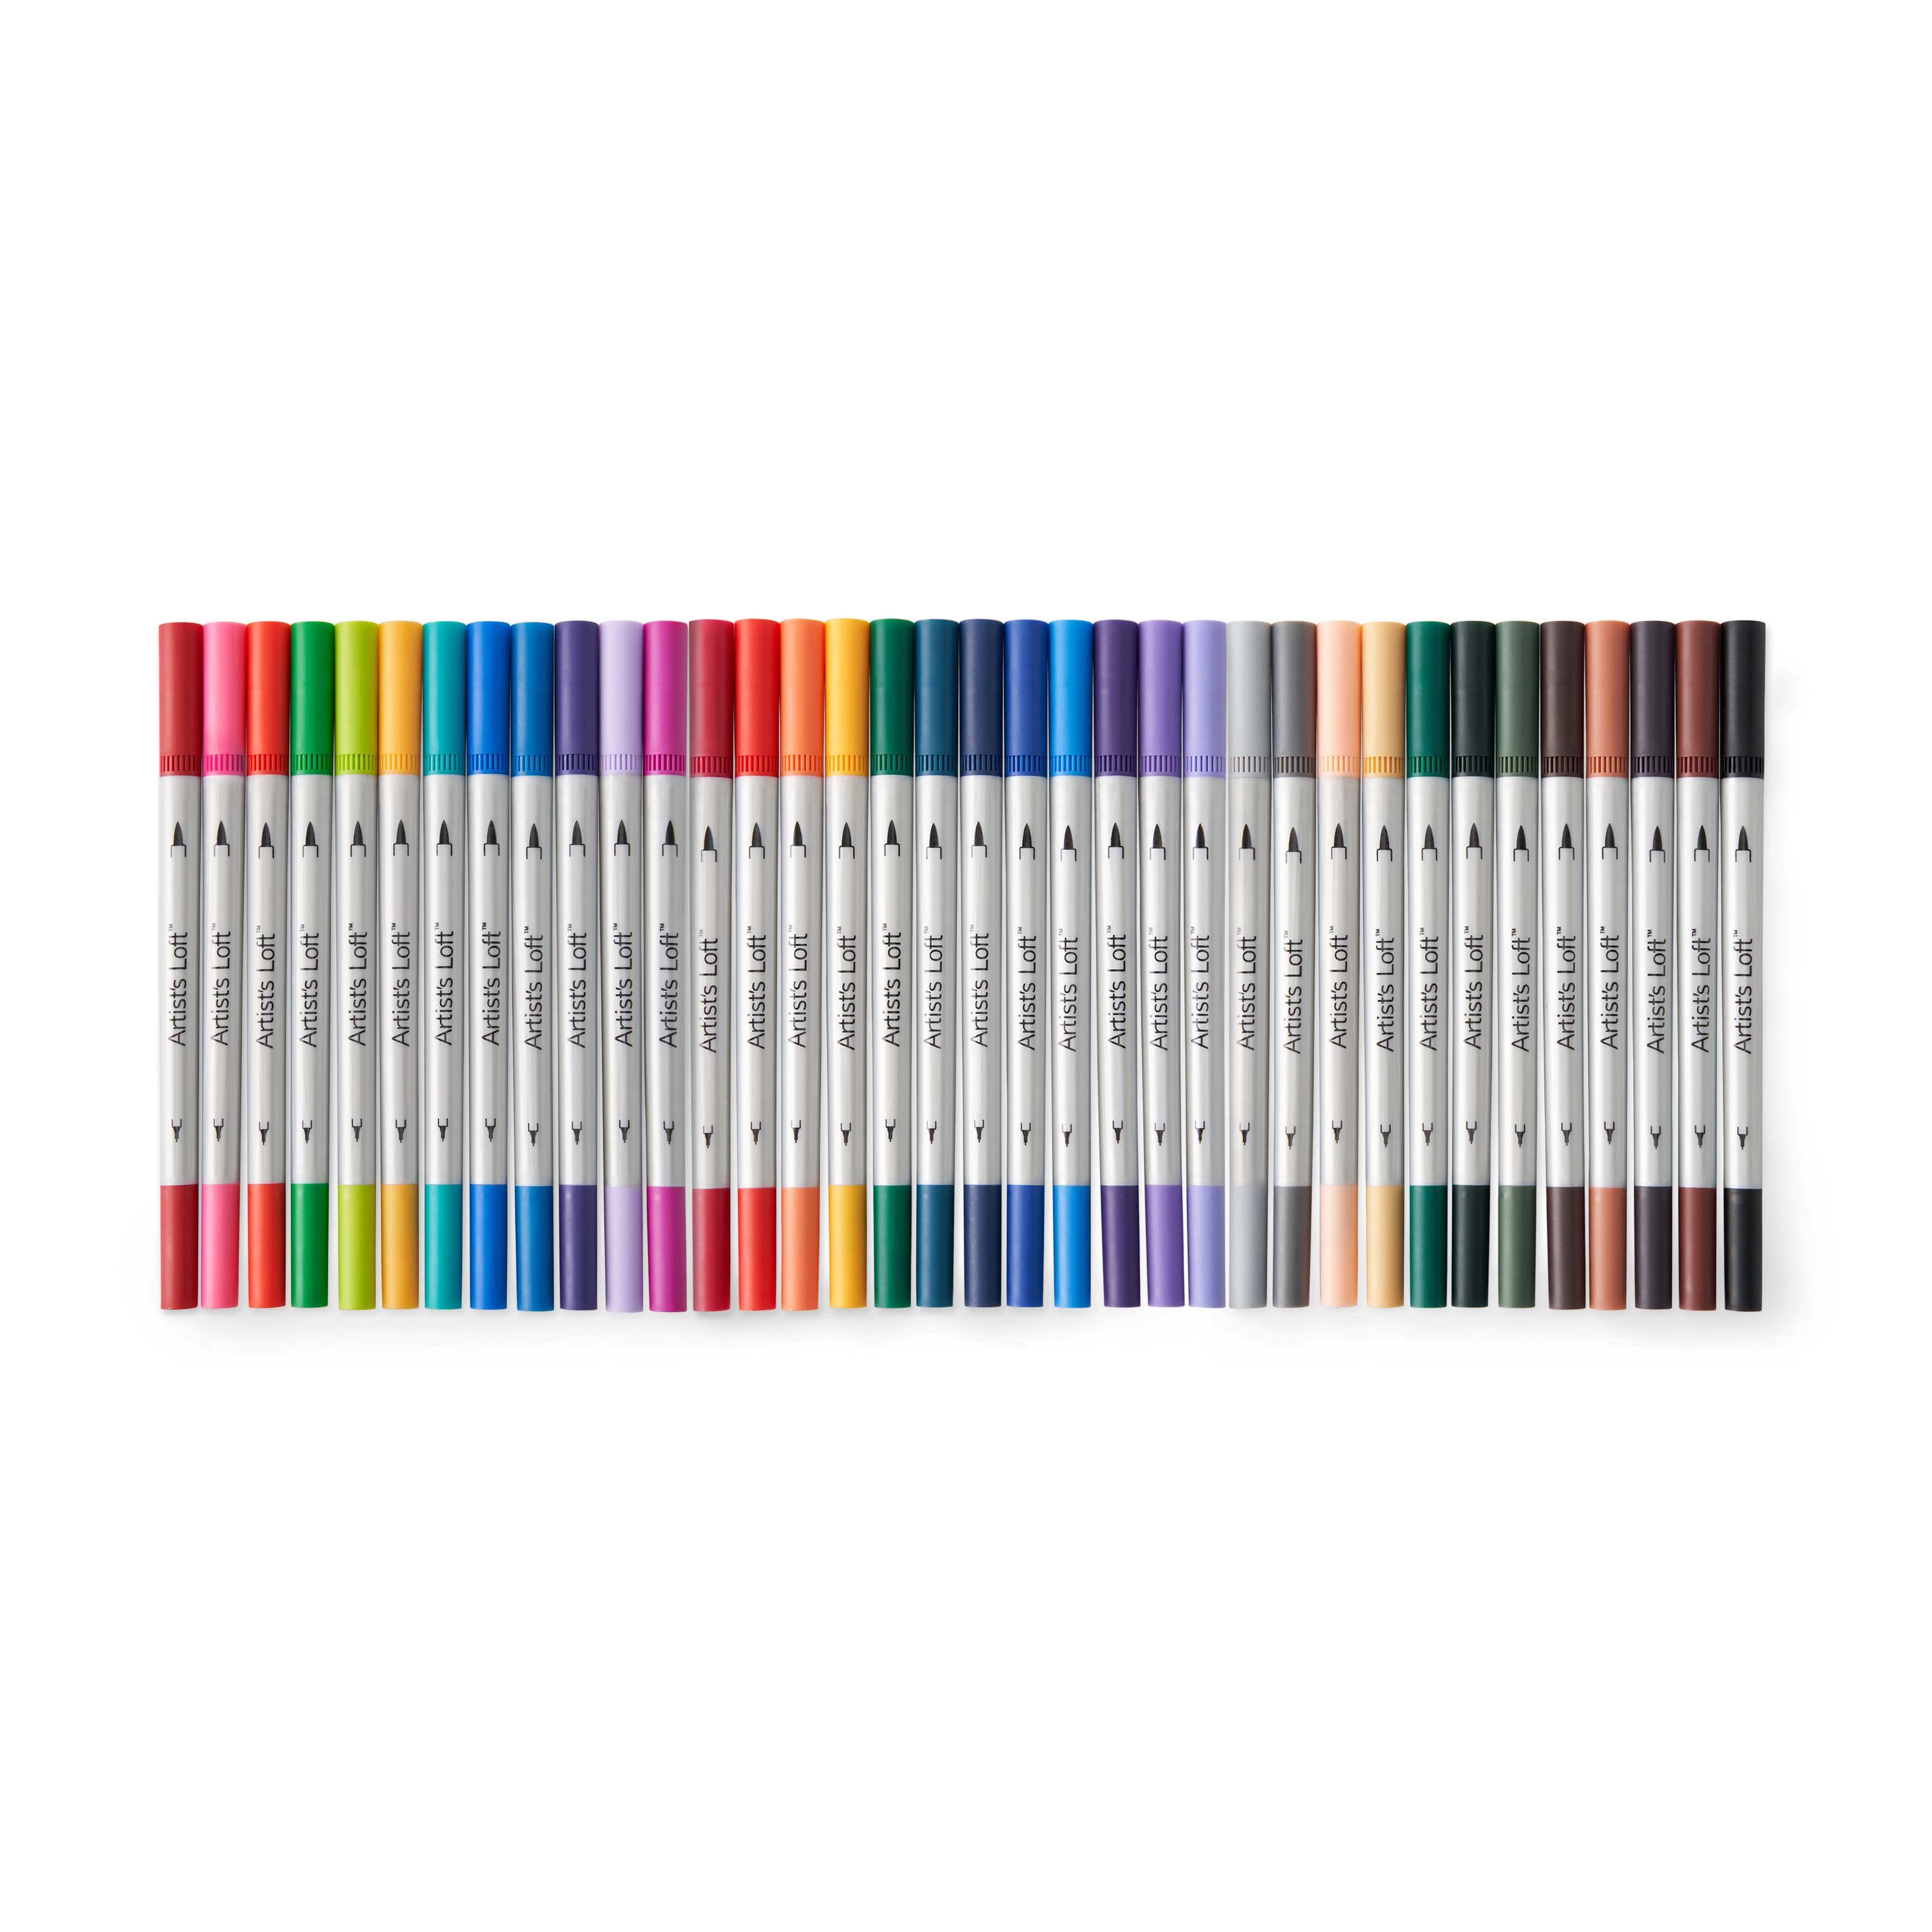 What colored pencils should i get for sketching and coloring for beginner  and close to prisma colors quality? : r/learntodraw